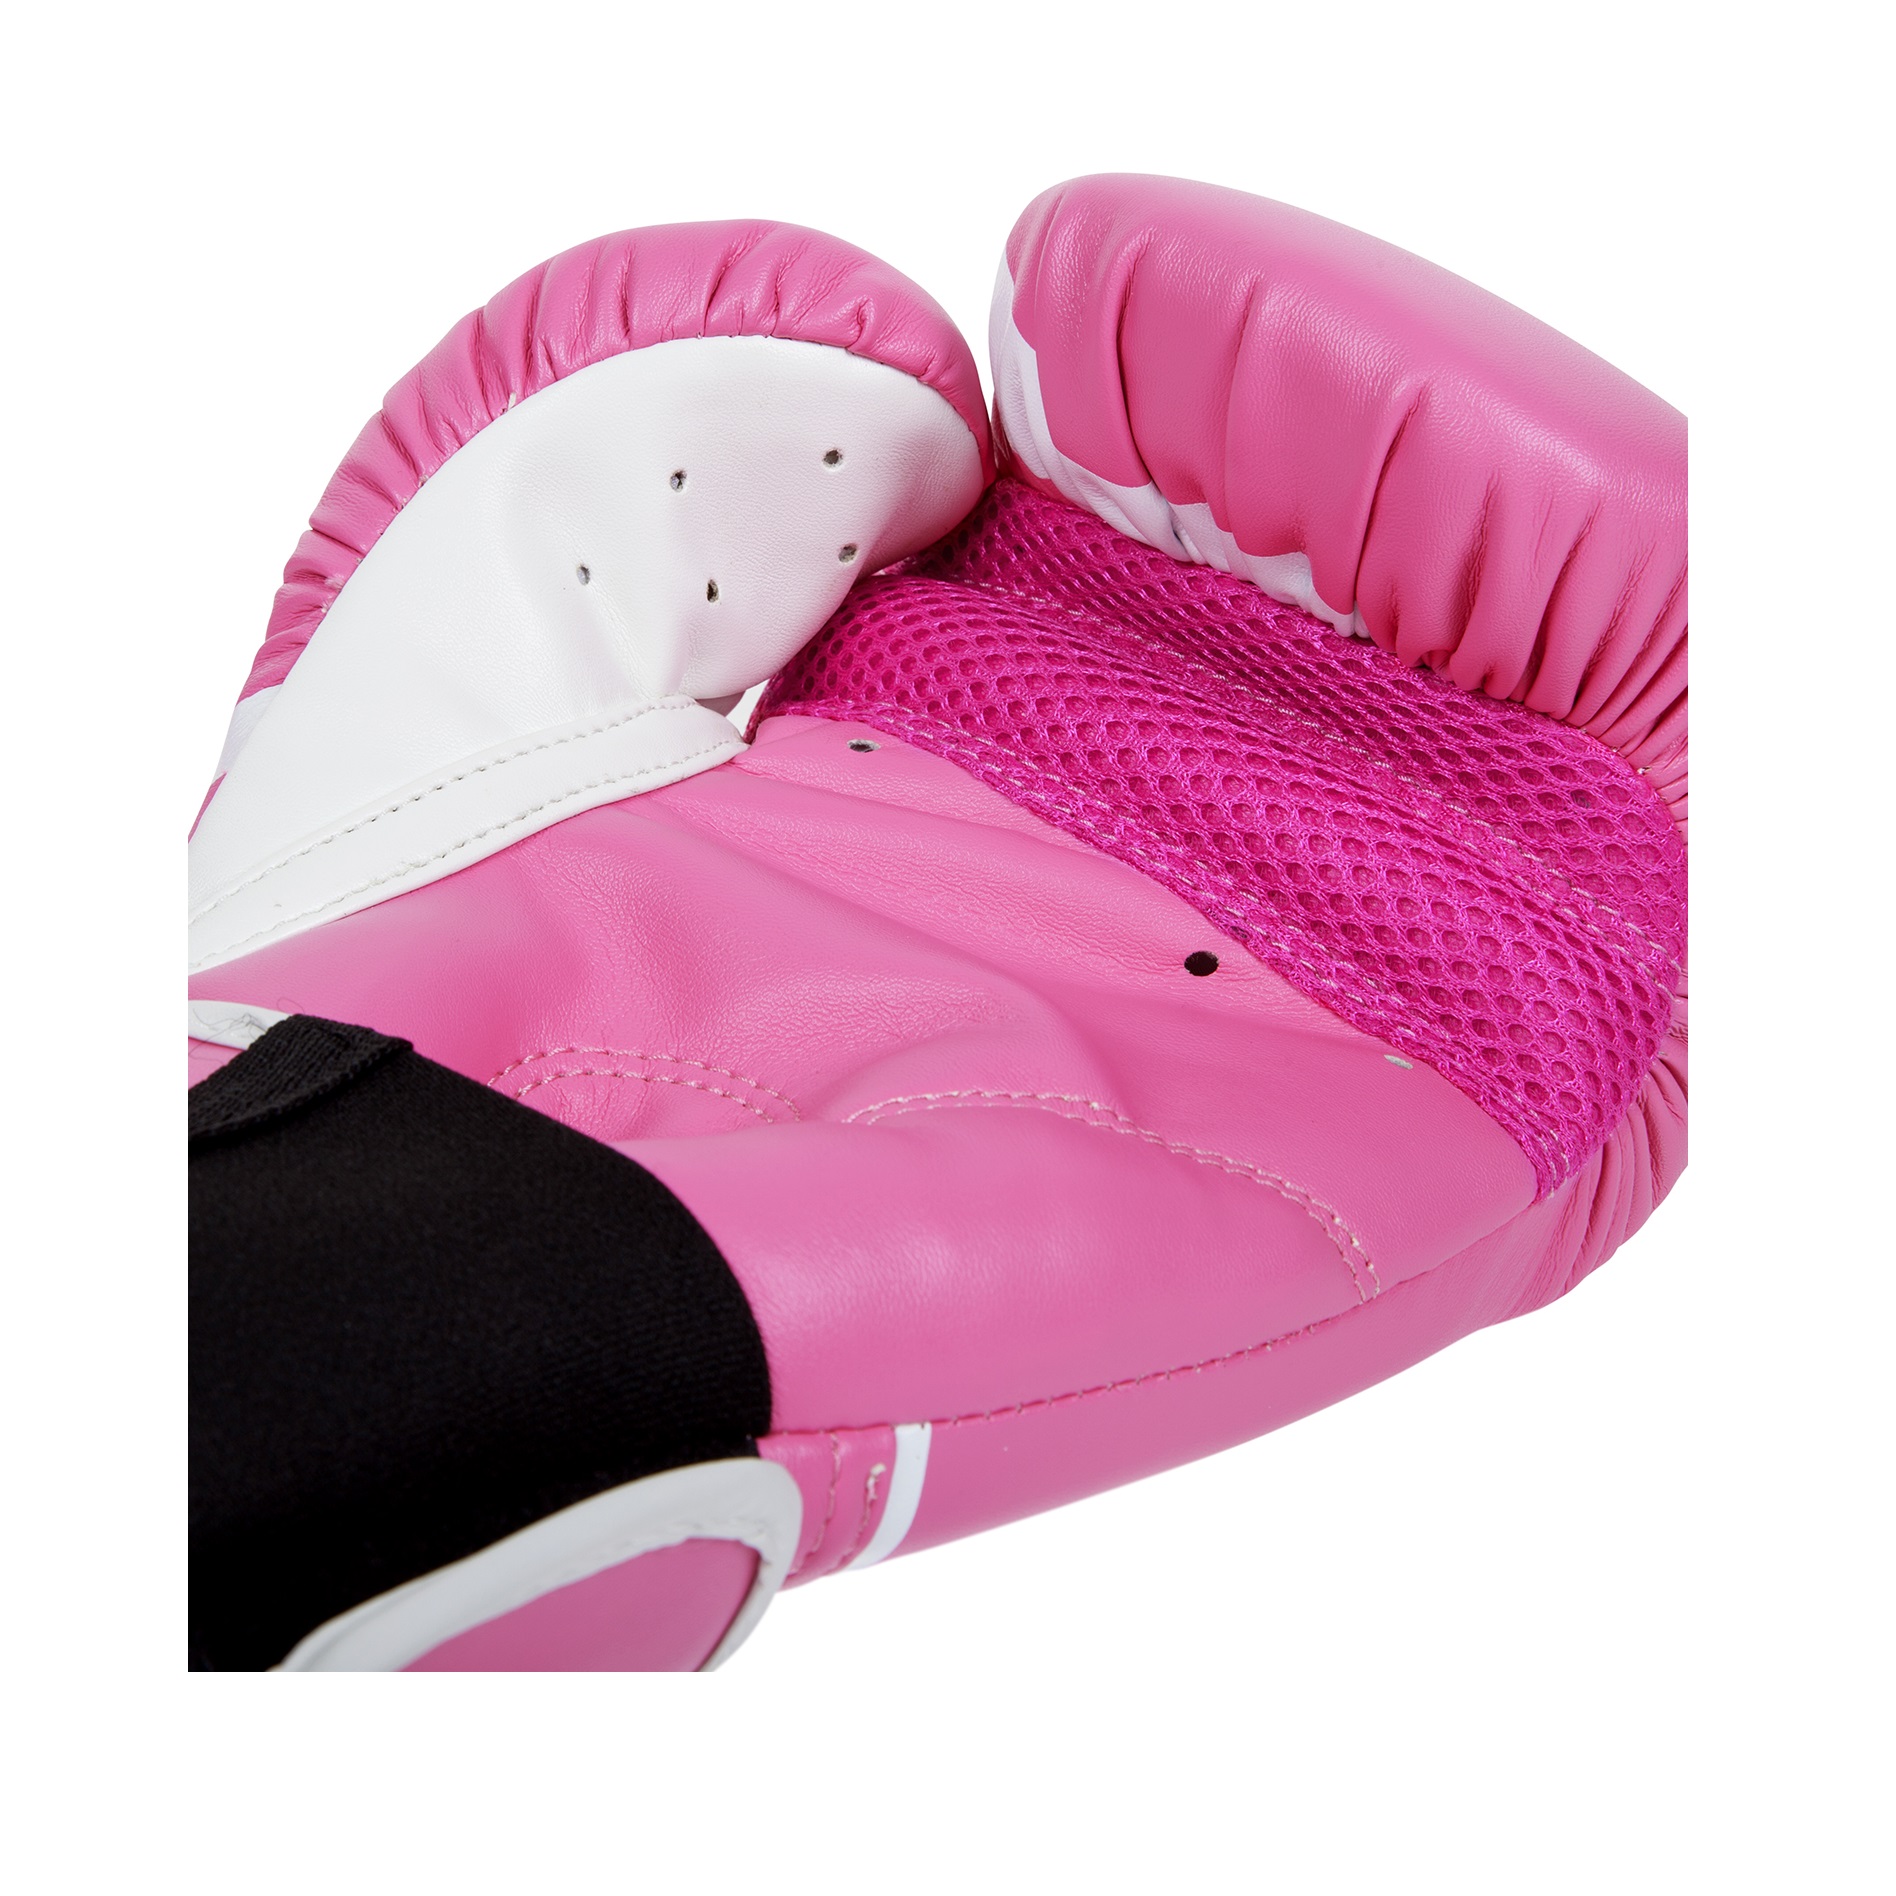 BOXING_GLOVES_CHALLENGER_PINK_1500_05